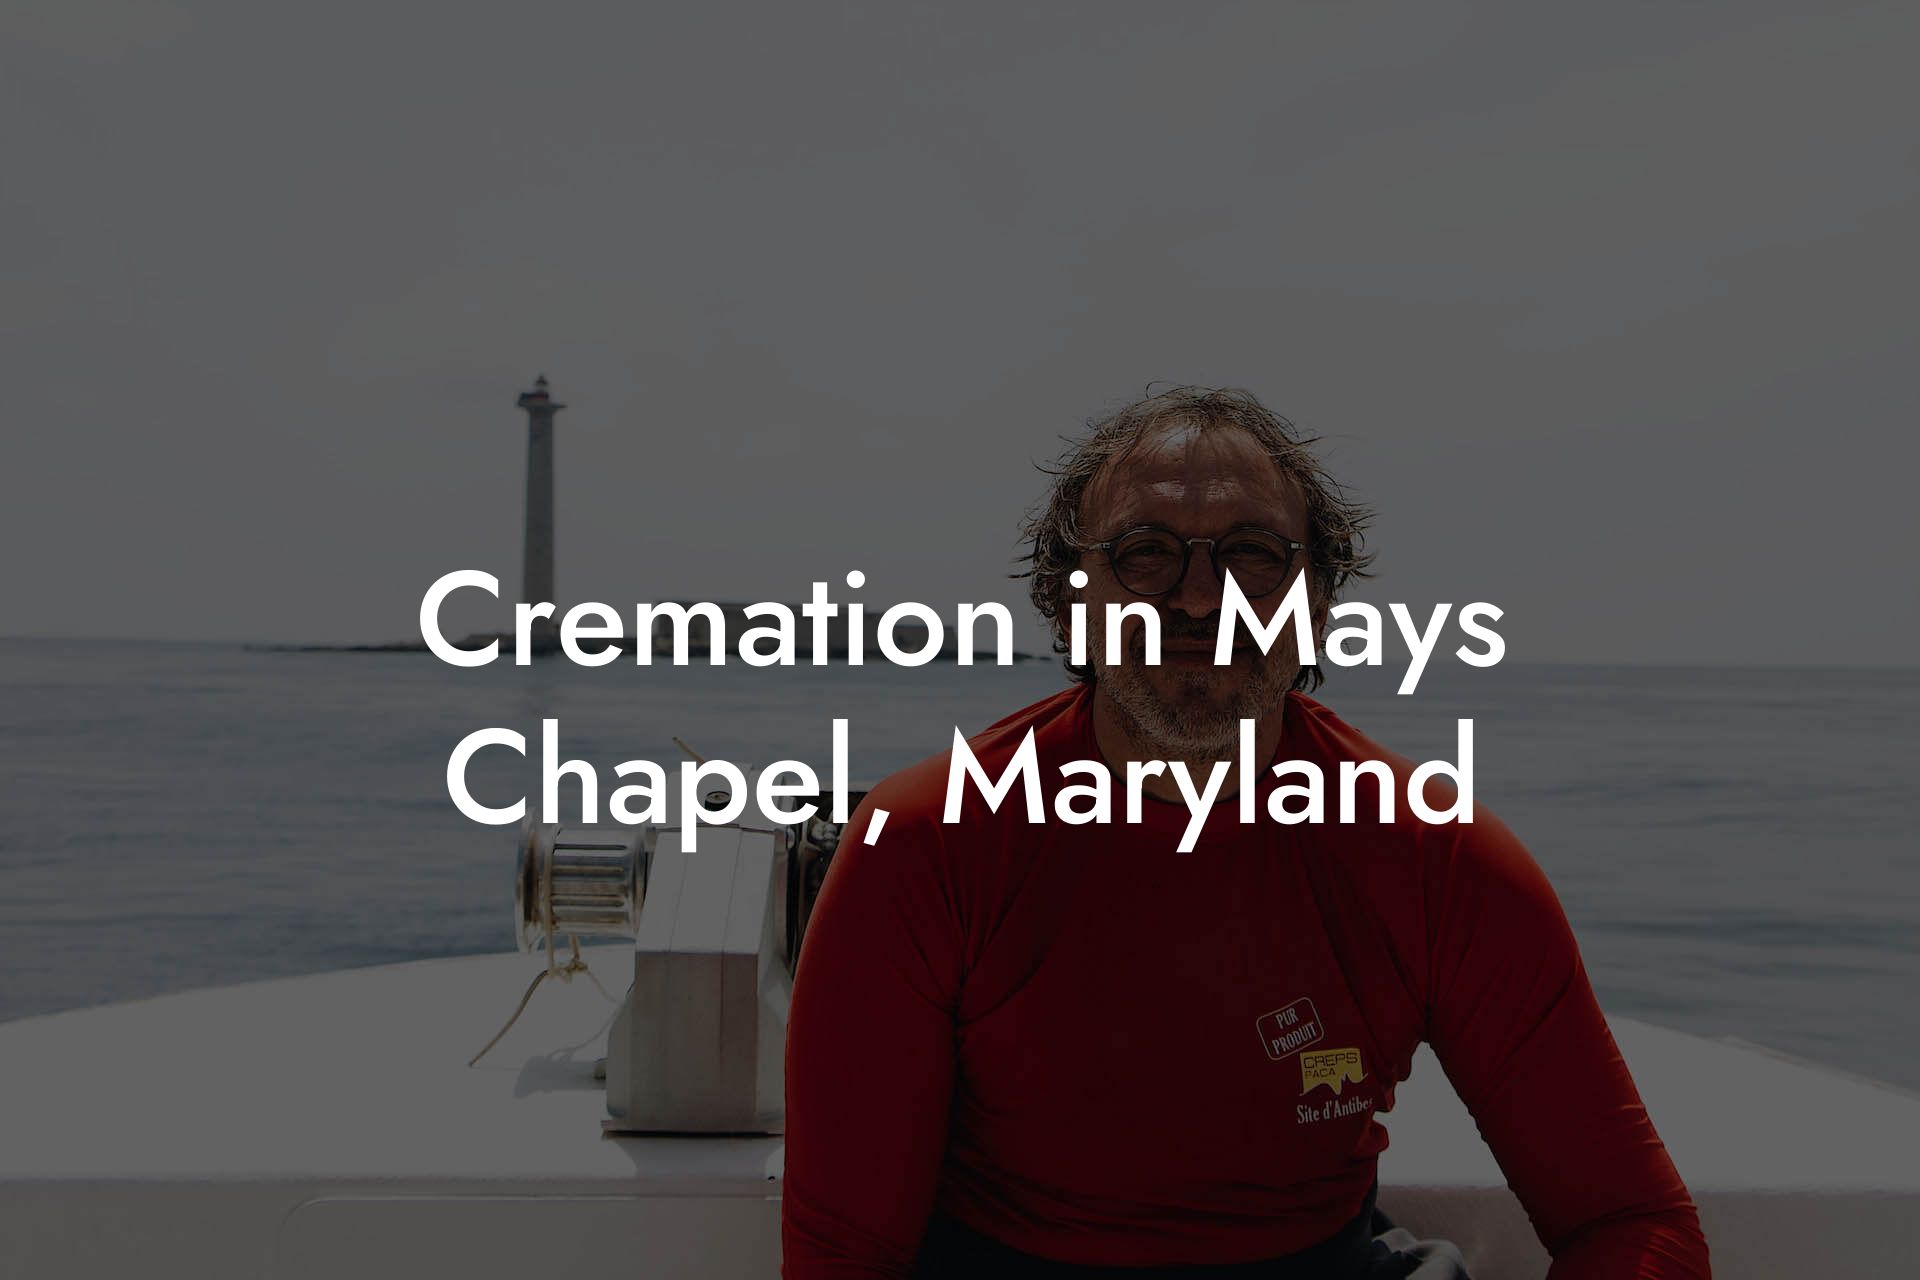 Cremation in Mays Chapel, Maryland